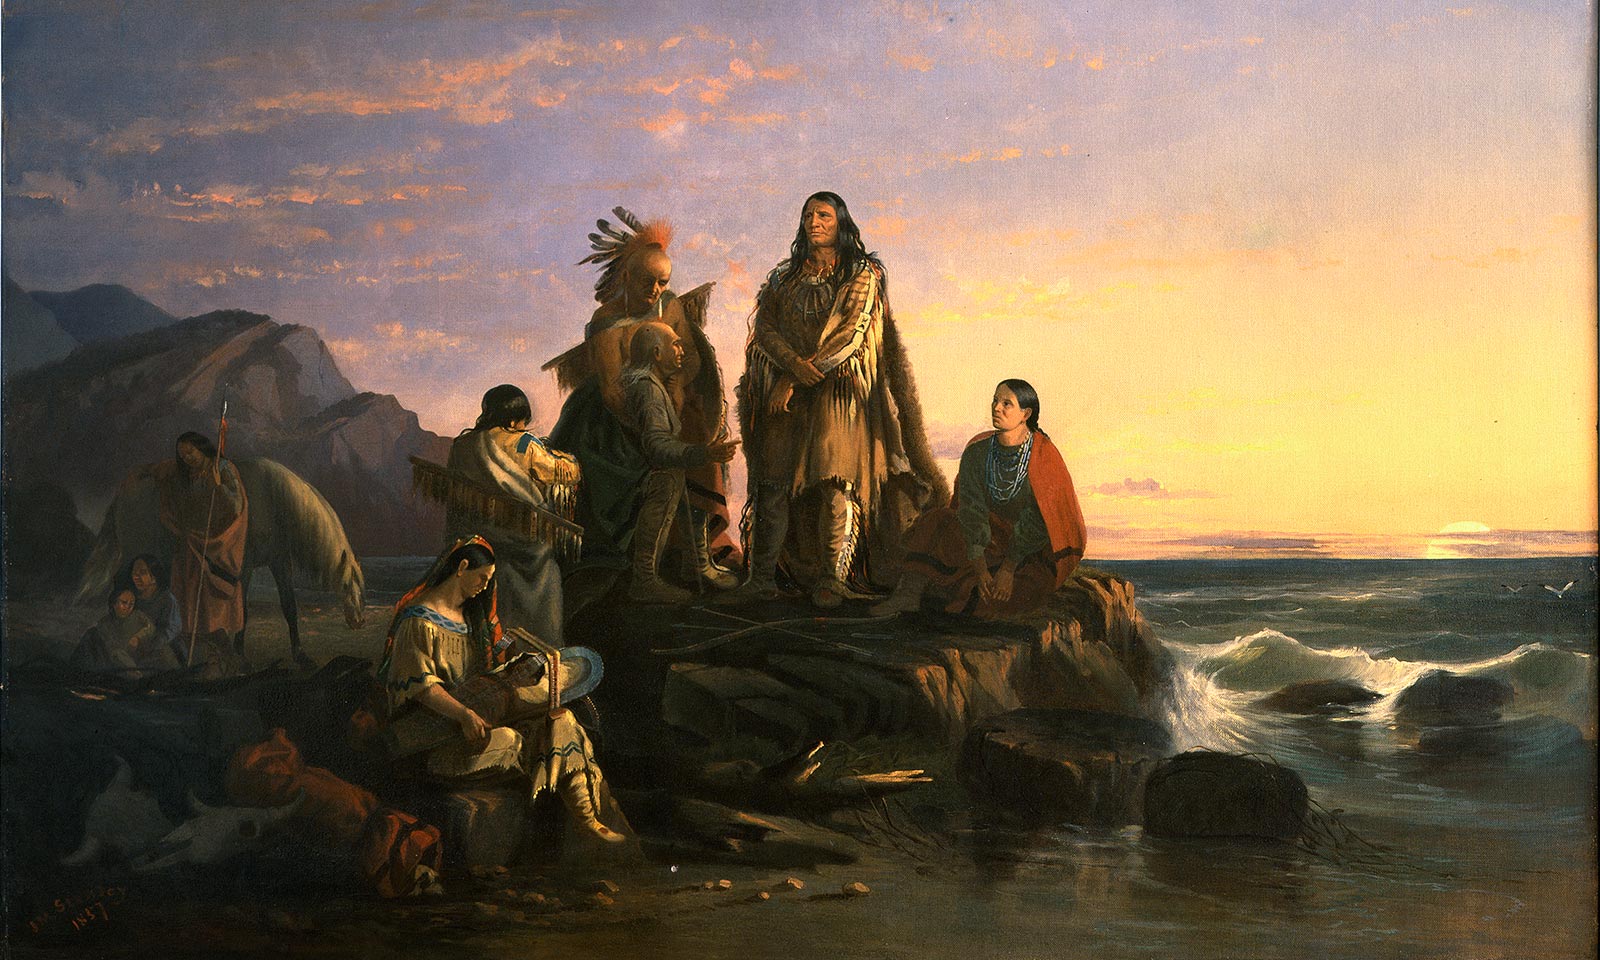 John Mix Stanley (American, 1814–1872), The Last of Their Race, 1857, oil on canvas, 52.125 x 68.5 inches (frame), Buffalo Bill Center of the West, Cody, Wyoming, USA, Museum purchase, 5.75